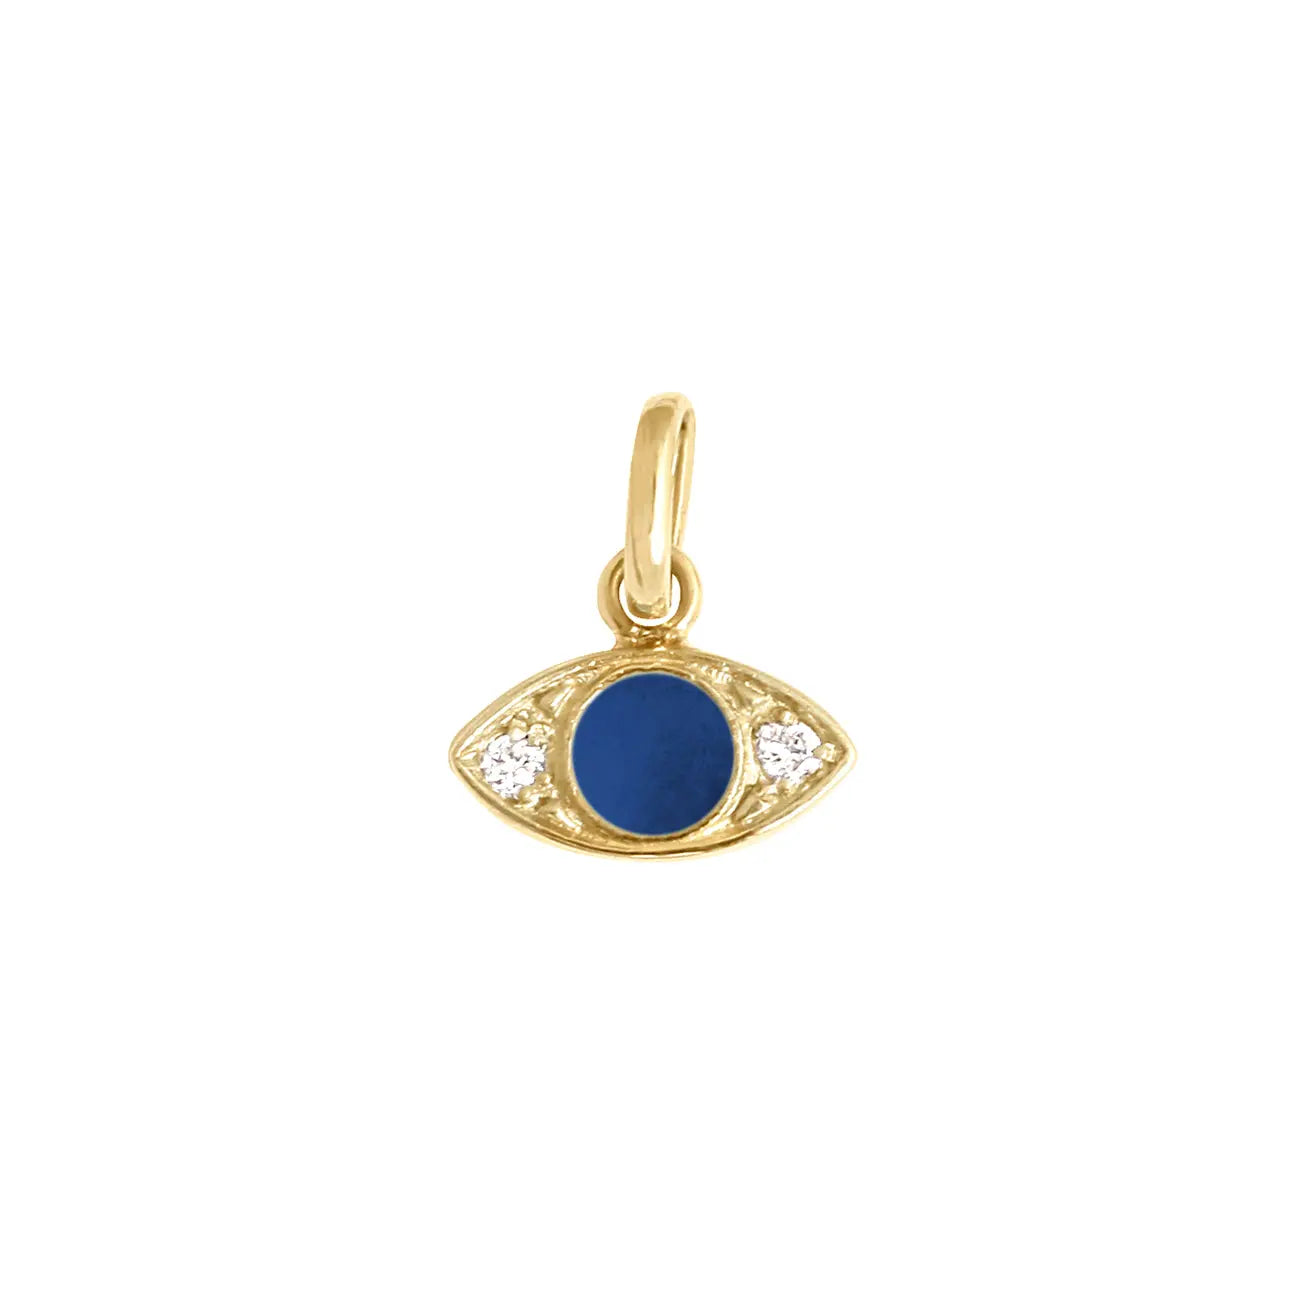 From gigi CLOZEAU's Voyage Collection the diamond eye charm features solid yellow gold, white diamonds, rich lapis-colored resin, and classic symbolism with modern appeal. Pair with one of many Gigi Classic necklaces or bracelets, sold separately. Diamonds have a total carat weight of 0.02 cttw. The bail measures 10.16mm.